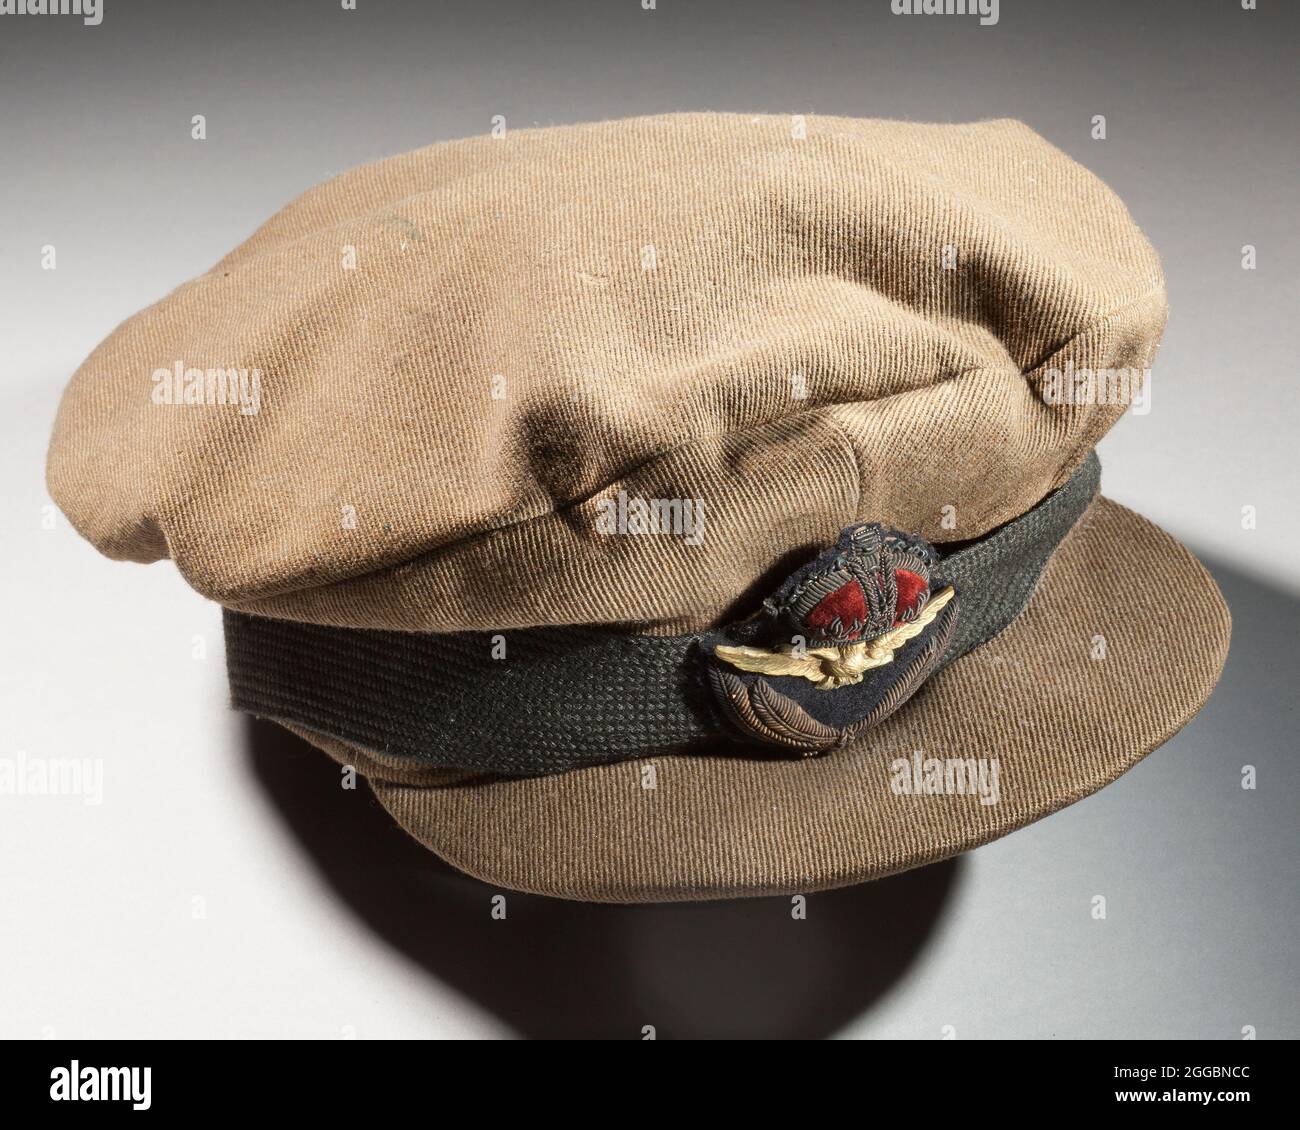 Officer's service cap, Royal Flying Corps, ca. 1910s. First World War O.D. billed cap with RFC badge and RAF cloth badge worn over band, owned by Lt. Wes D. Archer. Wes Archer, an American with Canadian parents, joined the Royal Flying Corps in 1917. He was shot down in 1918. He  returned to the United States in 1920 and wrote &quot;Death in the Air: The War Diary and Photographs of a Flying Corps Pilot&quot;. Stock Photo